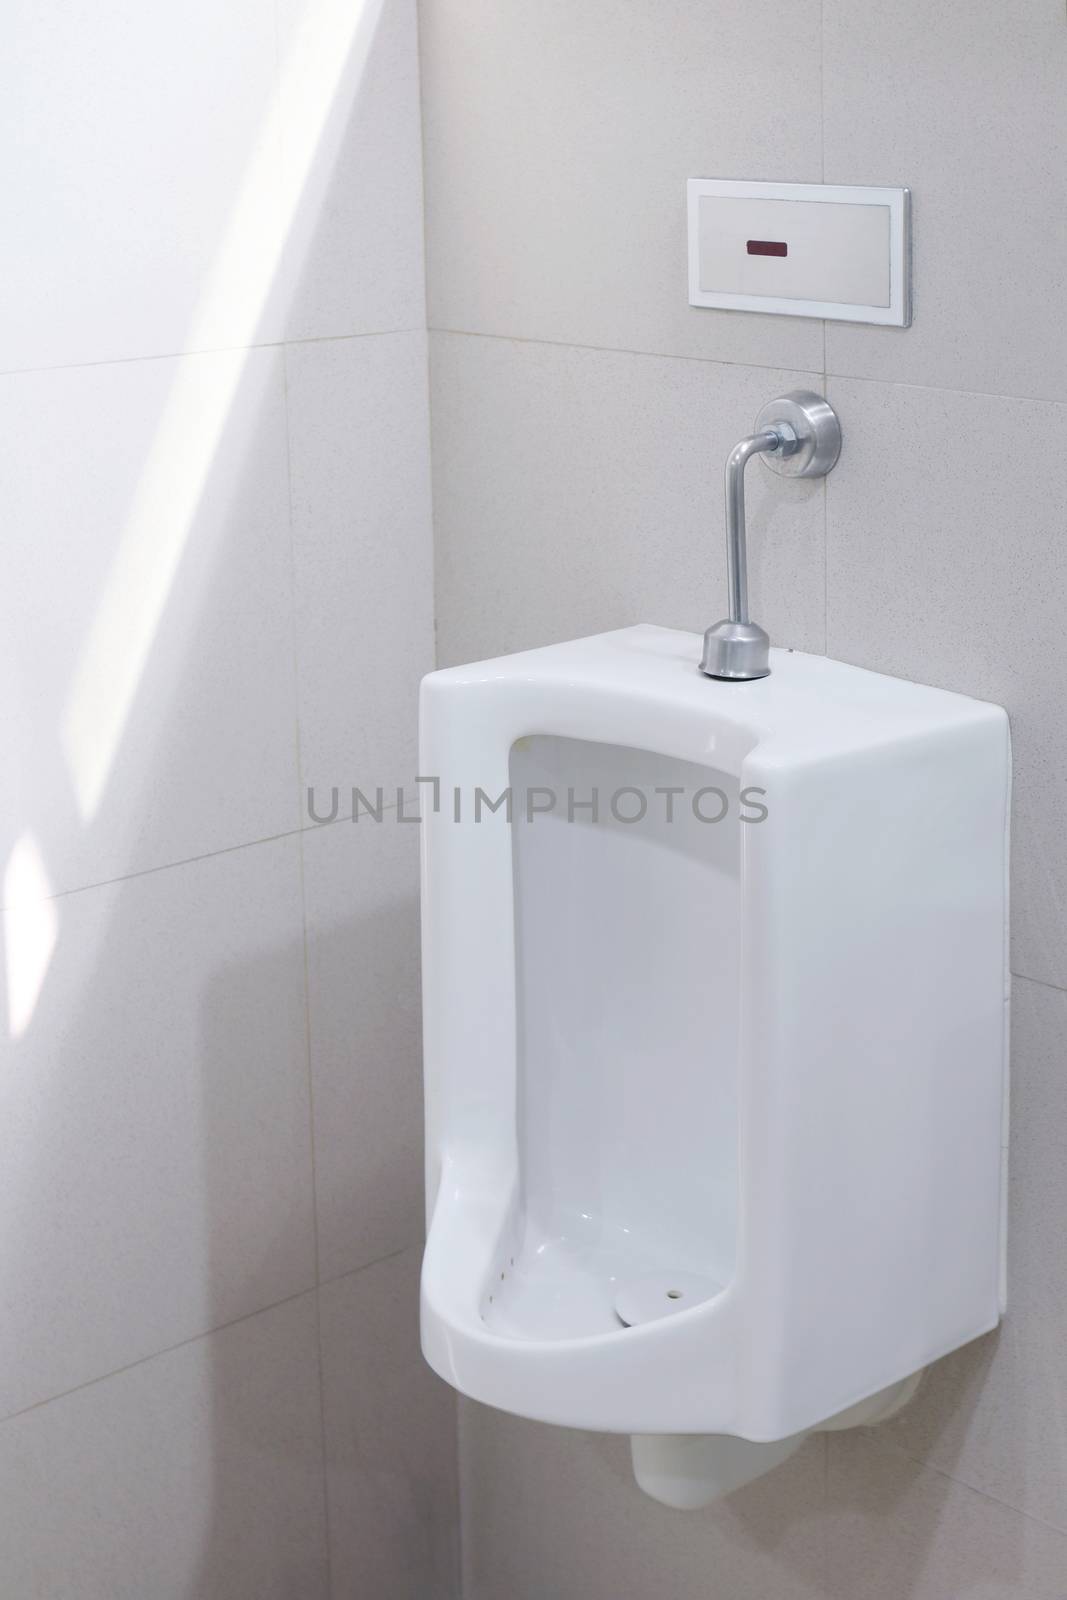 Urinals for men outdoor toilet, Urinals white ceramic at bathroom public, close-up white urinals by cgdeaw